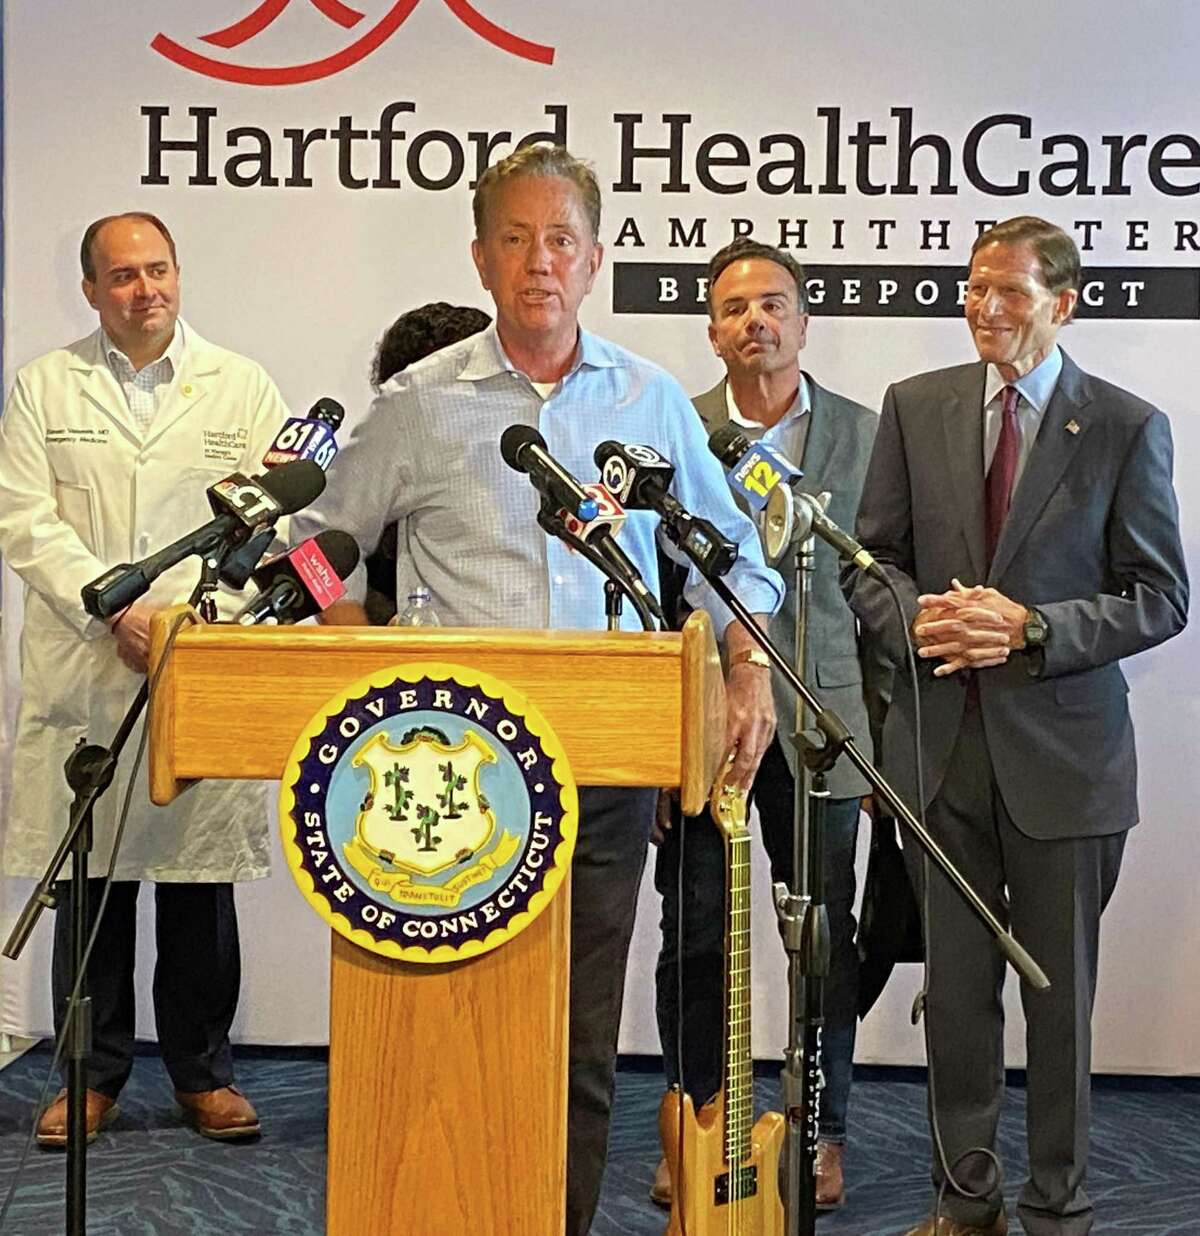 Gov. Ned Lamont talks about the state’s new Rock the Shot vaccine incentive program Friday, June 25, 2021 at the Hartford Healthcare Amphitheater.